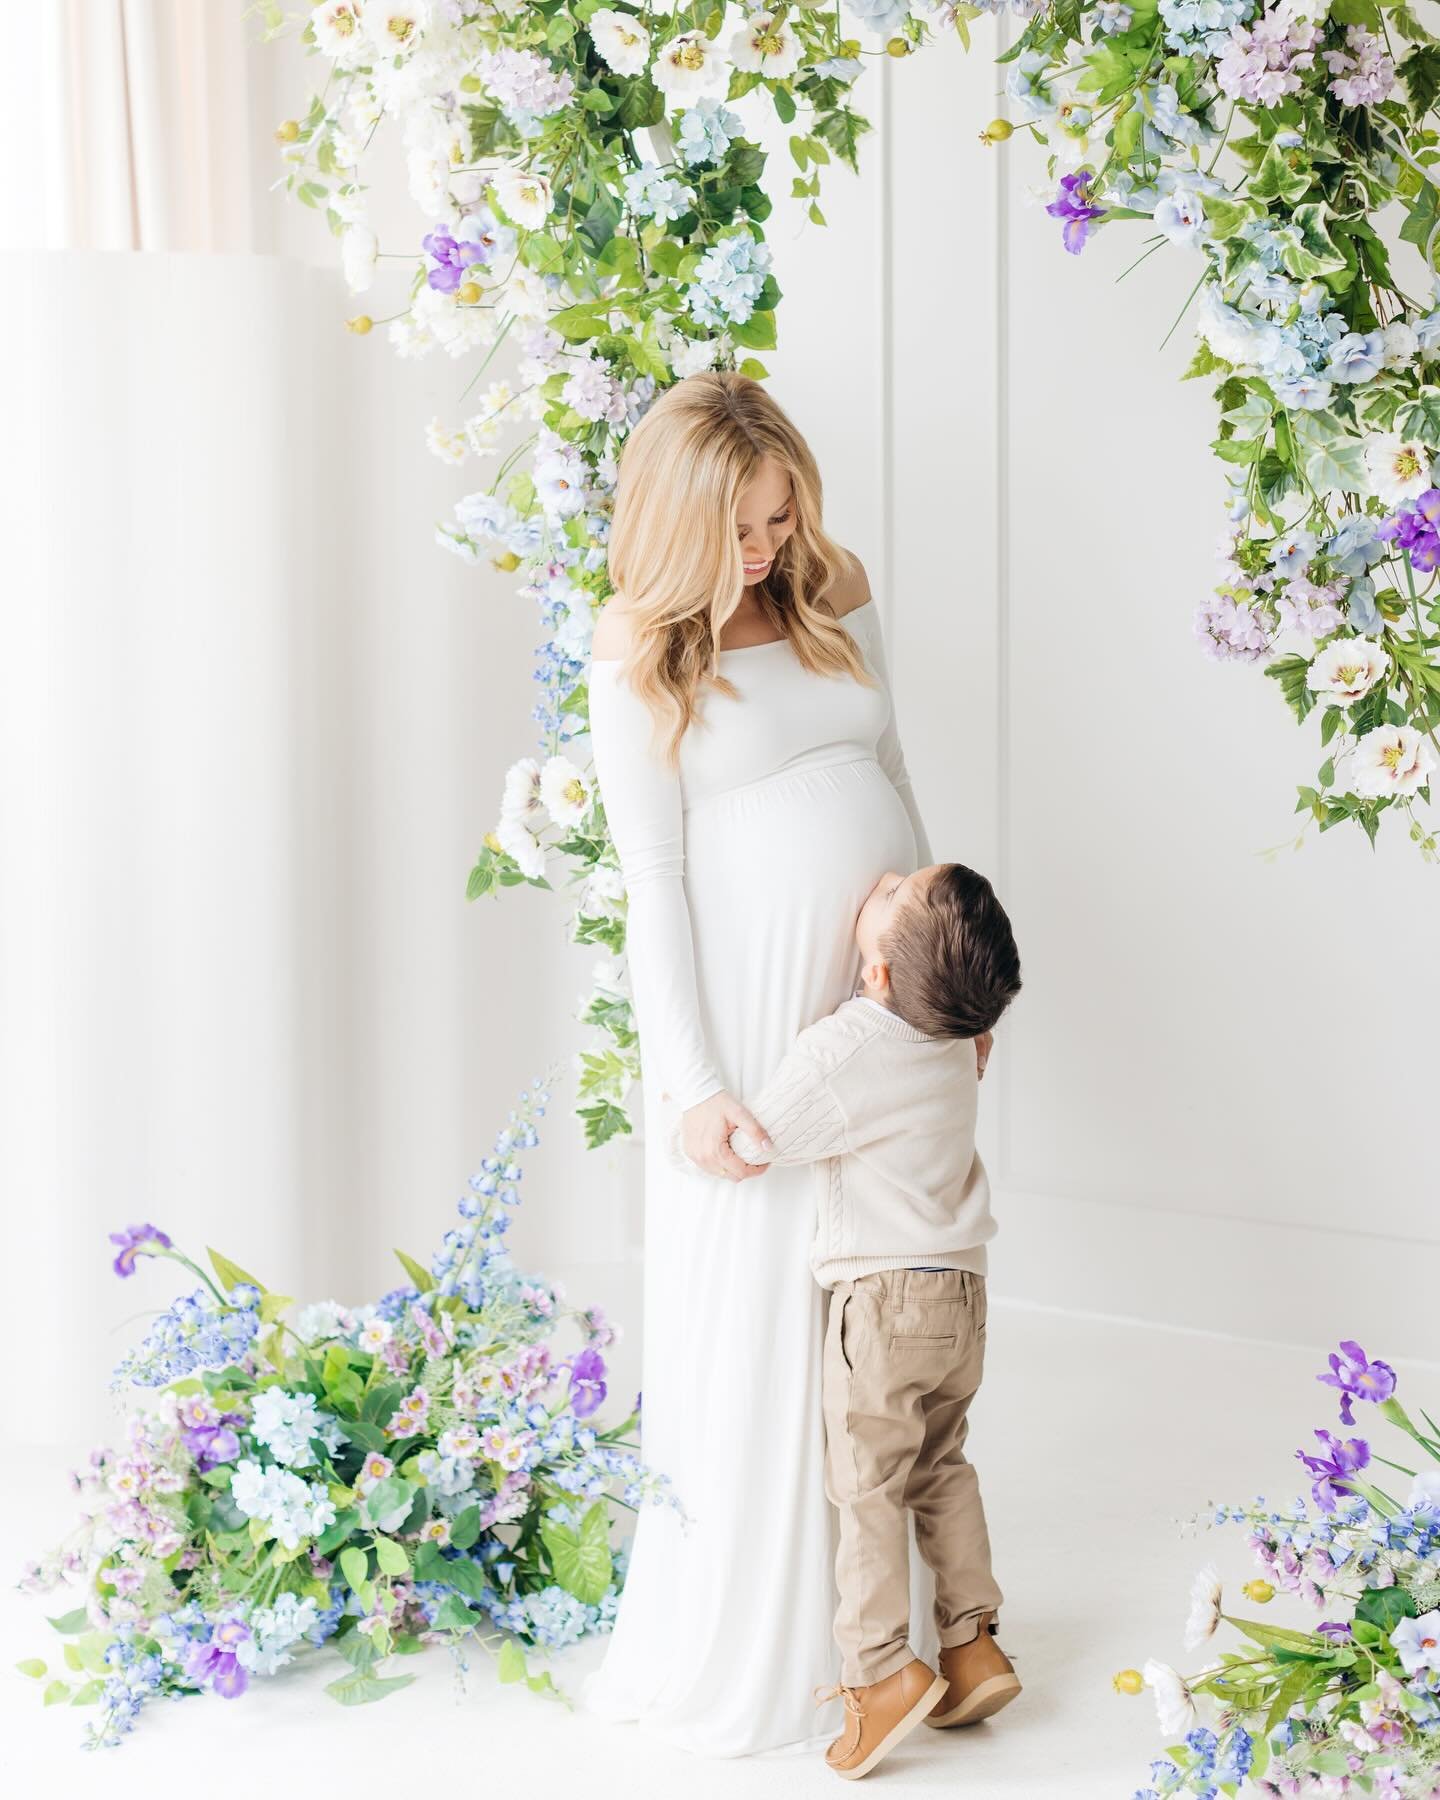 Happy Mother&rsquo;s Day to all of the moms, moms-to-be, and mother-figures!! Thank you for having us capture all of these special milestones! 💜💙🩷⁣
⁣
#mintroomstudios #mintroombest #mothersdayflorals #maternitysession #maternityportraits #torontop